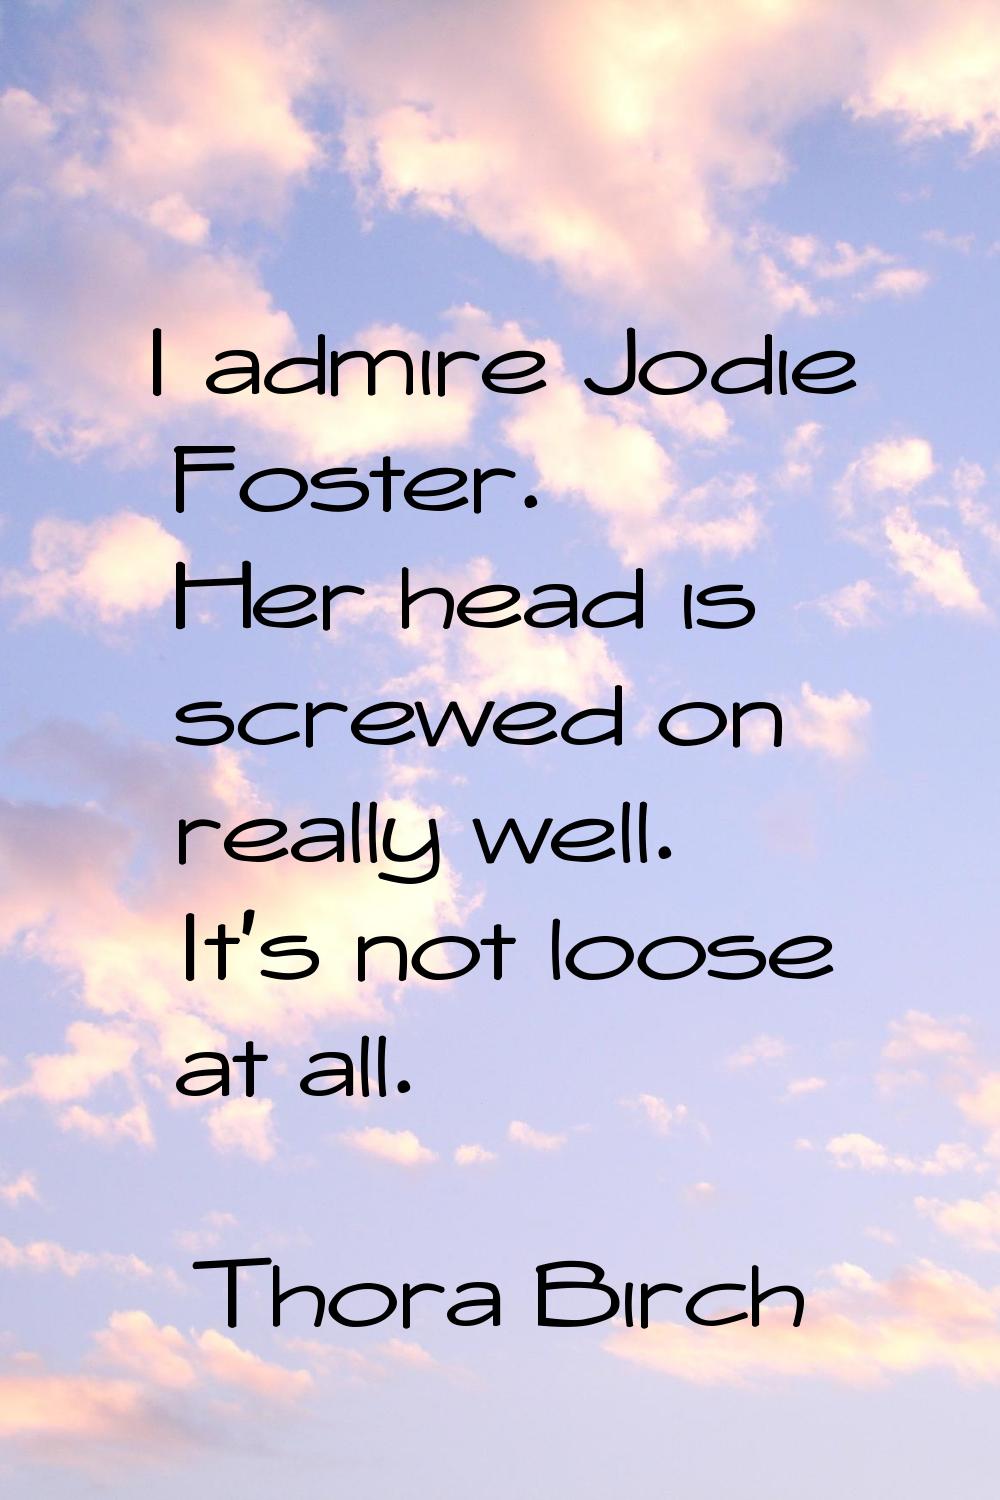 I admire Jodie Foster. Her head is screwed on really well. It's not loose at all.